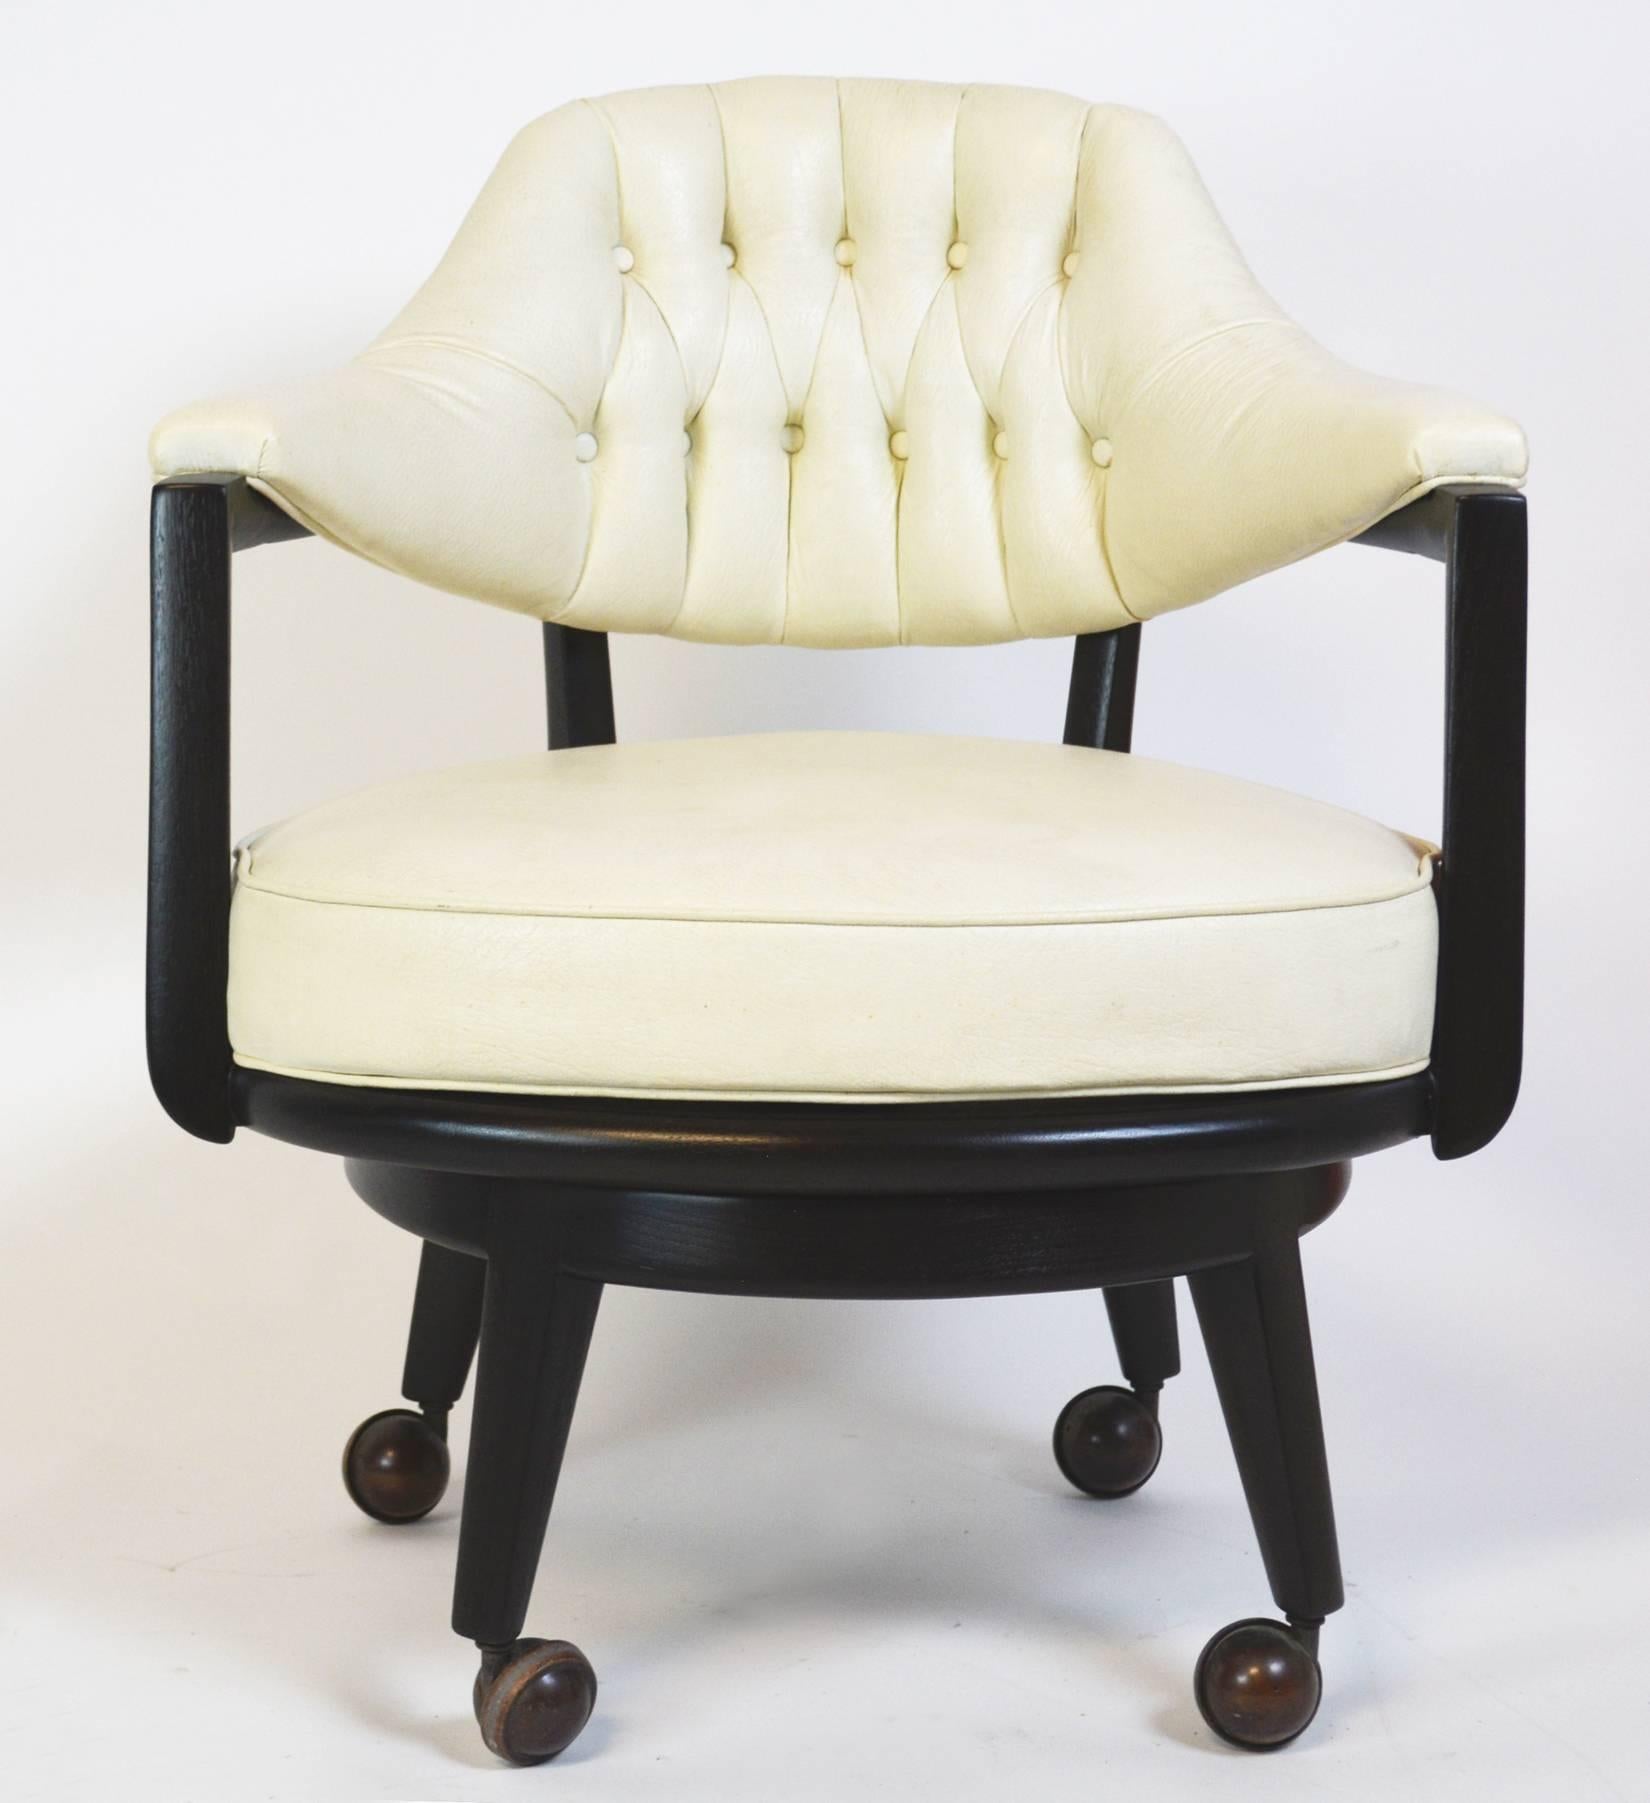 A fantastic pair of Monteverdi-Young swivel chairs designed by Maurice Bailey. Refinished, ebonized wood frame and base with original castors. Original upholstery and button tufted white leatherette in good condition, with age appropriate wear and